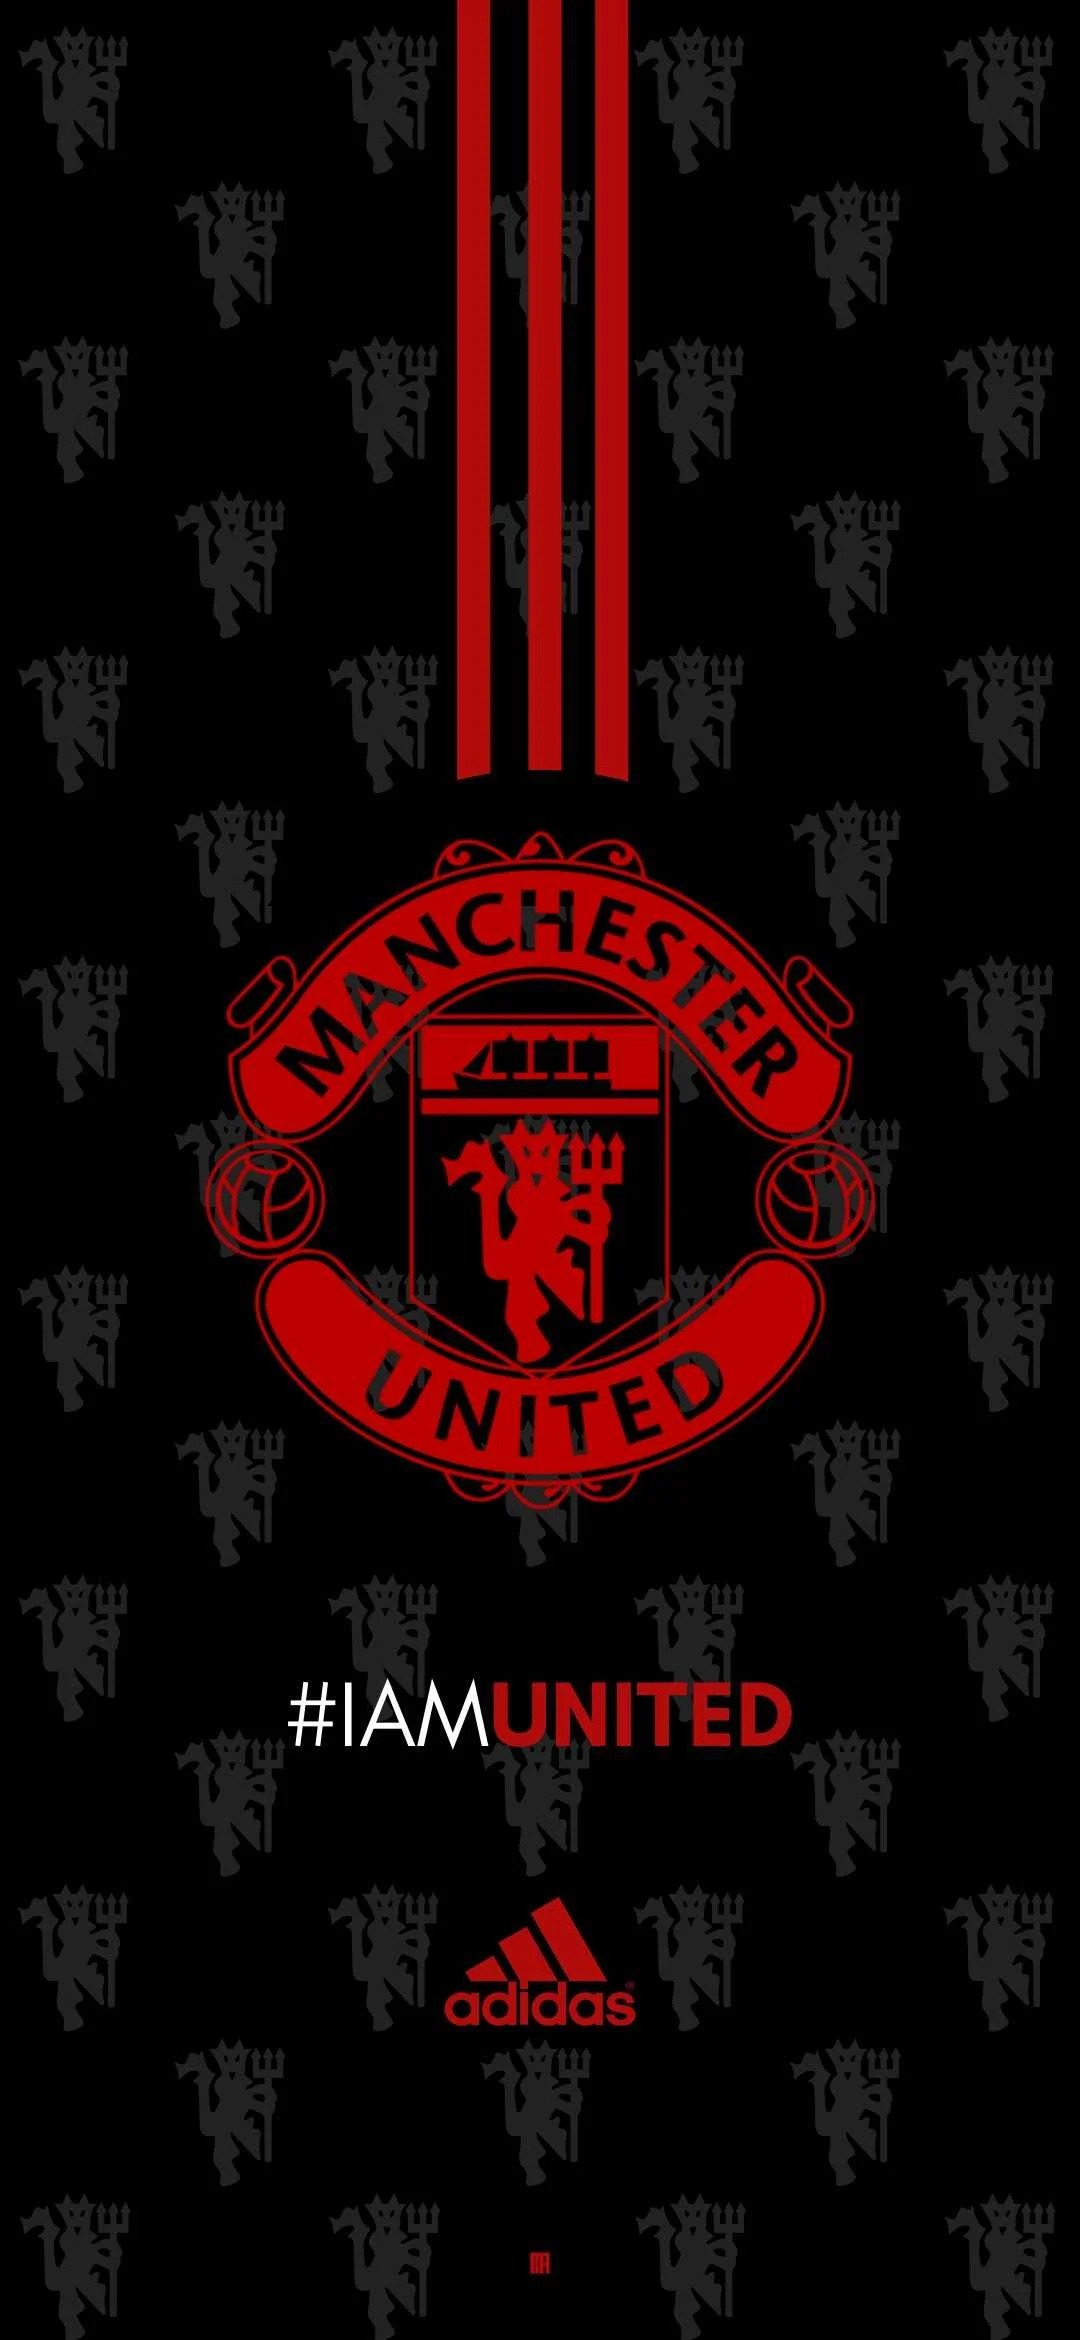 HD wallpaper, Manchester United Mobile Wallpapers, Samsung Hd Manchester United Background, Sports Theme, Backgrounds, 1080X2340 Hd Phone, Red Devils